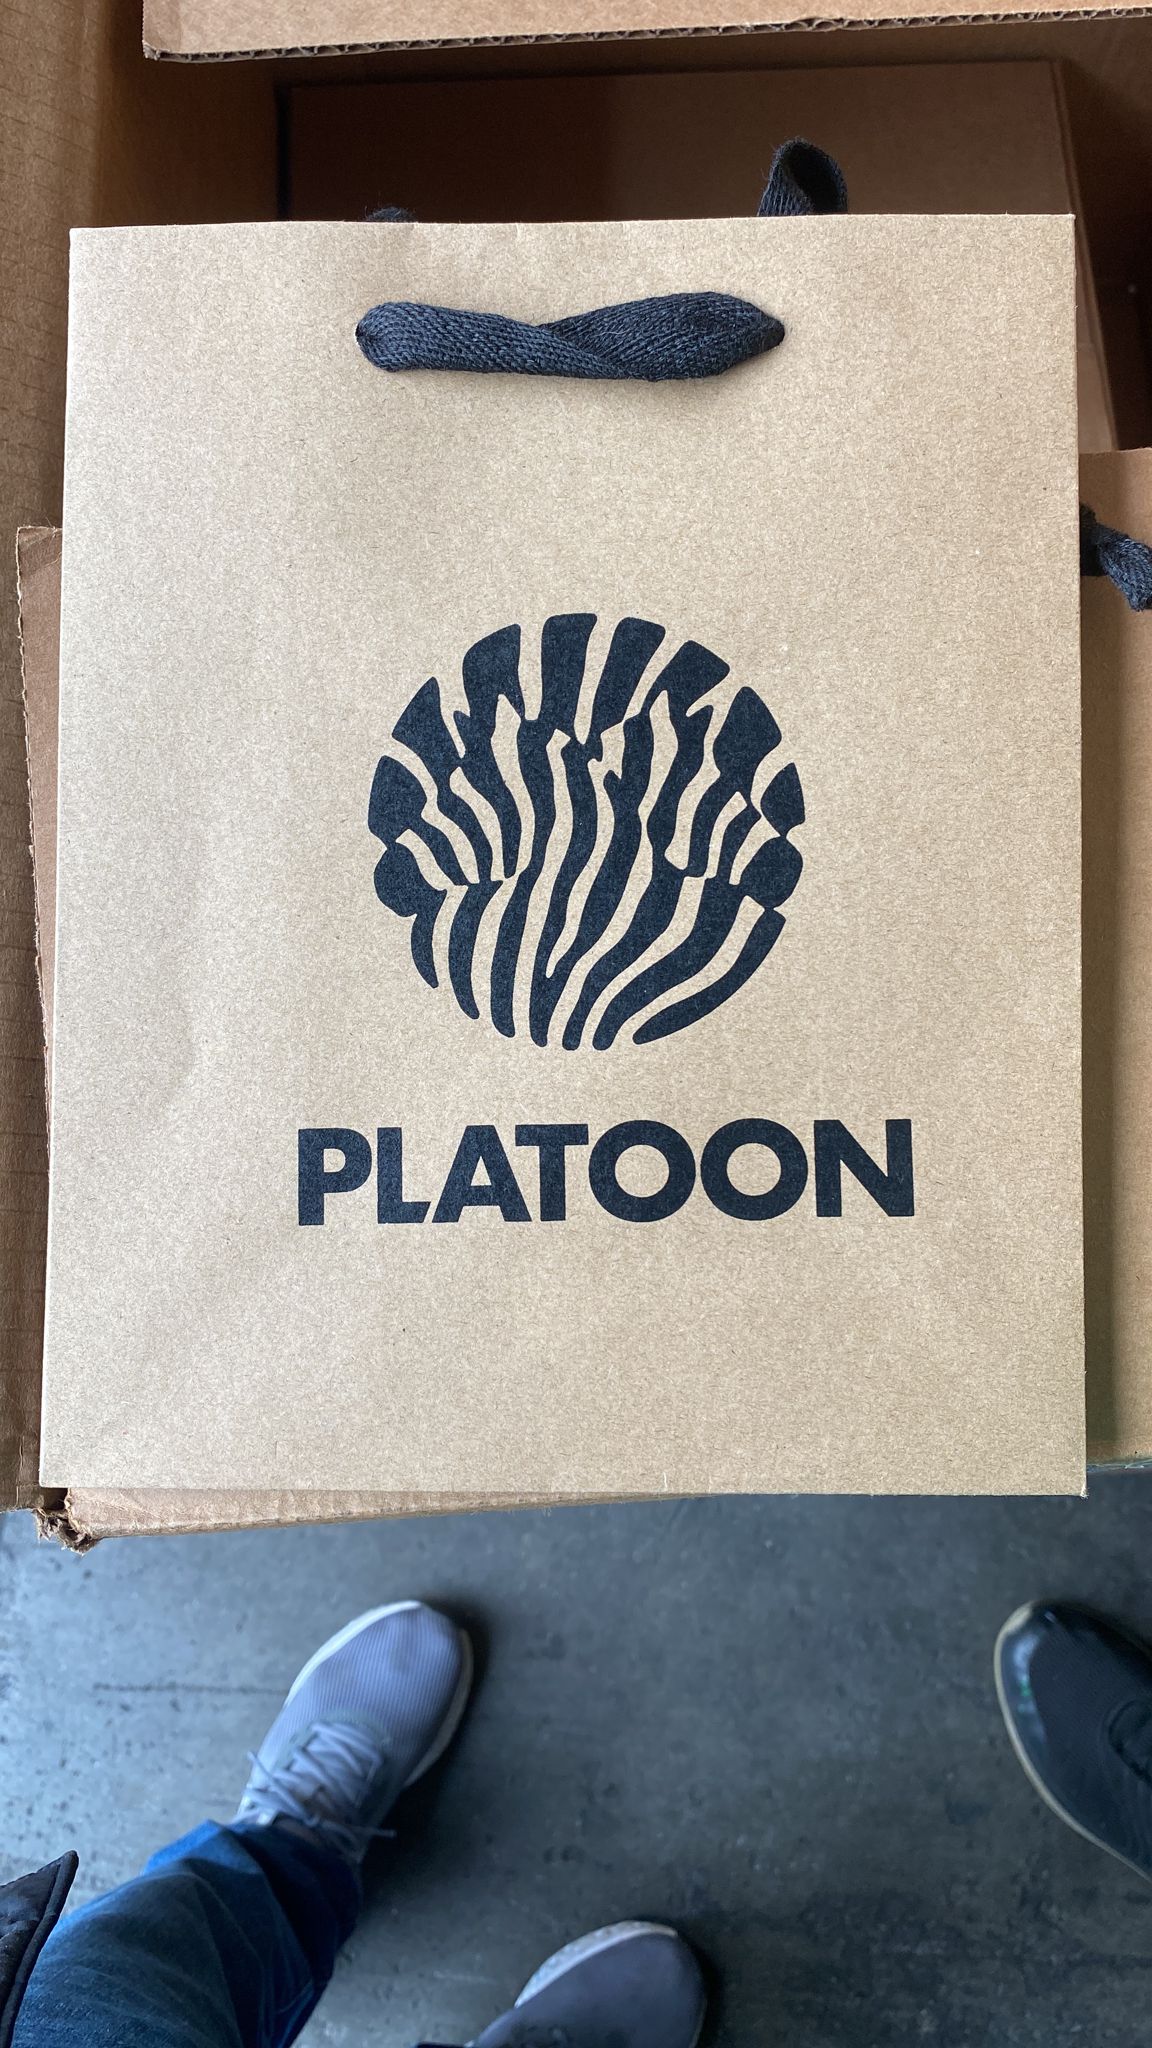 Customizable Paper Bags Printed with your Company Logo or Brand Name